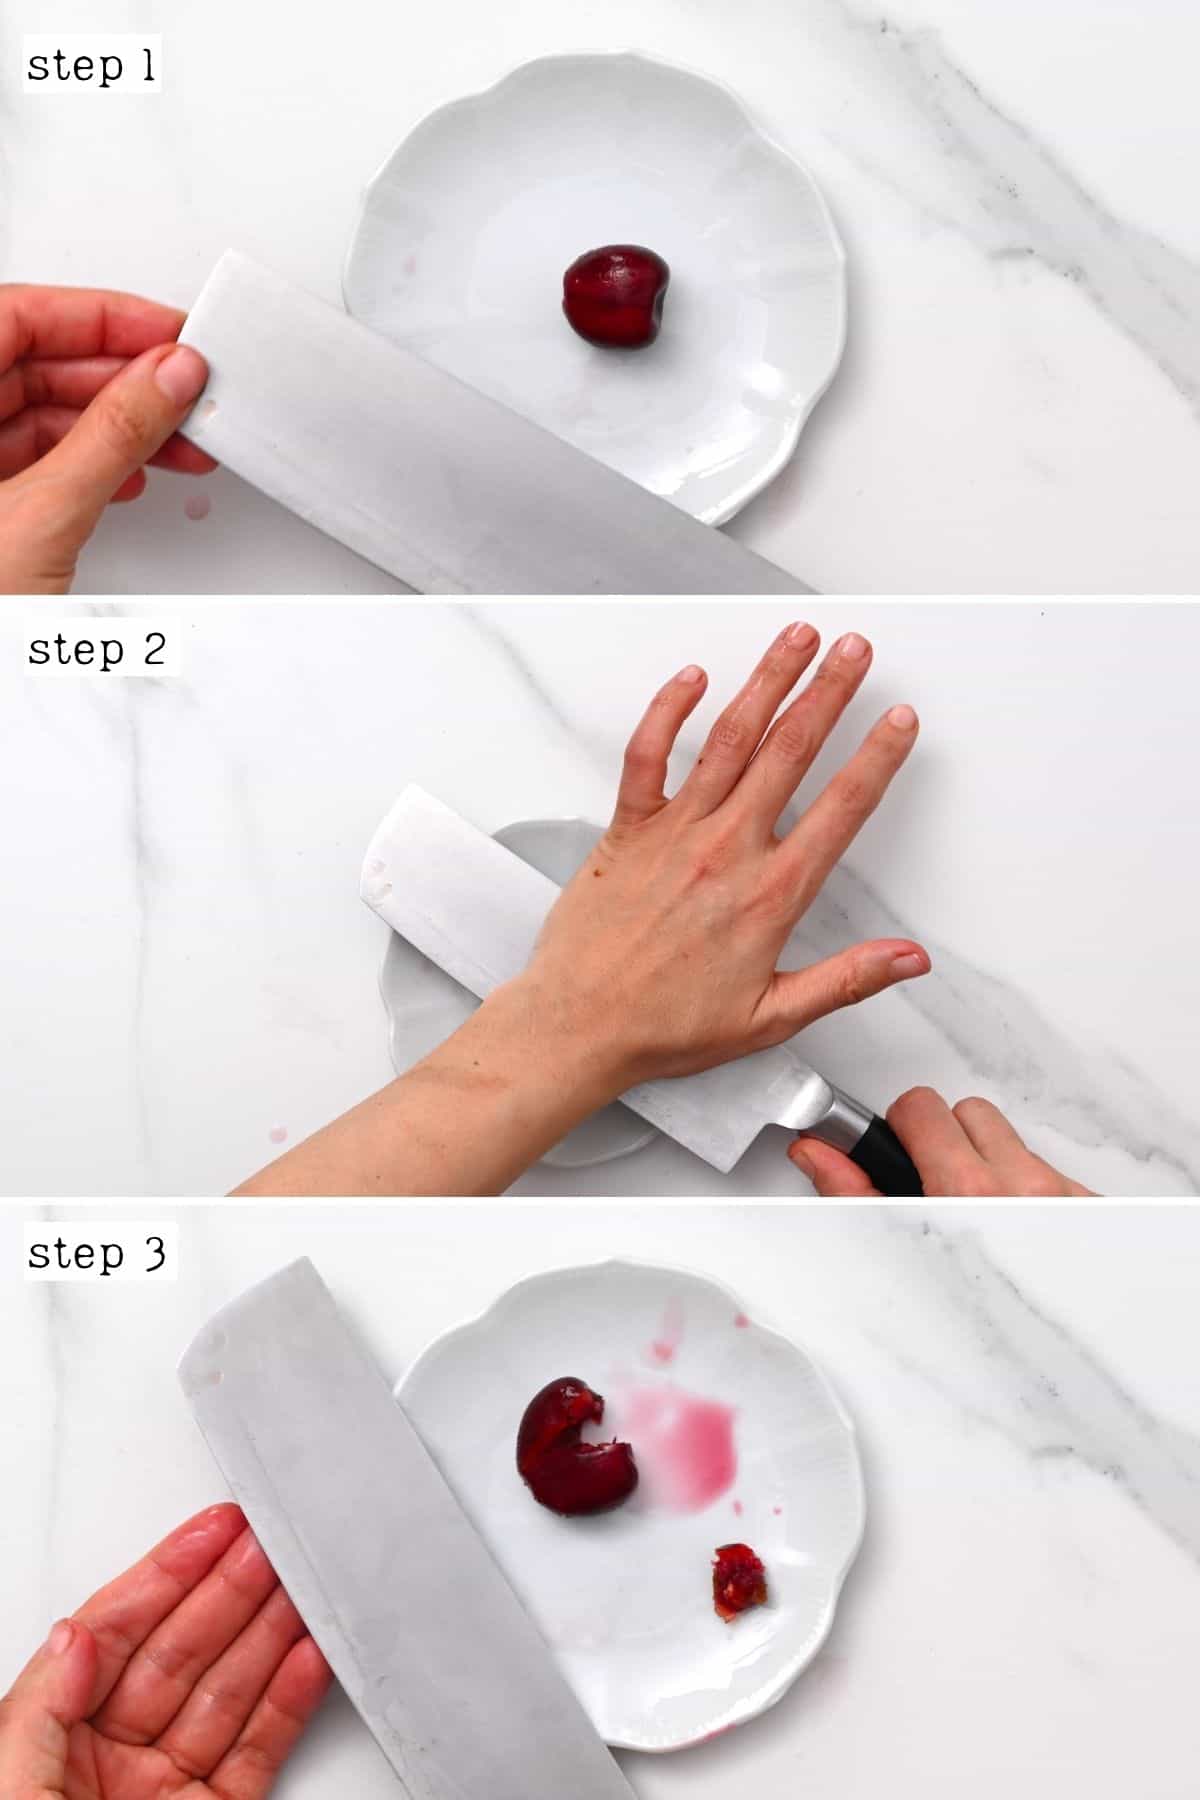 Steps for pitting a cherry with a knife